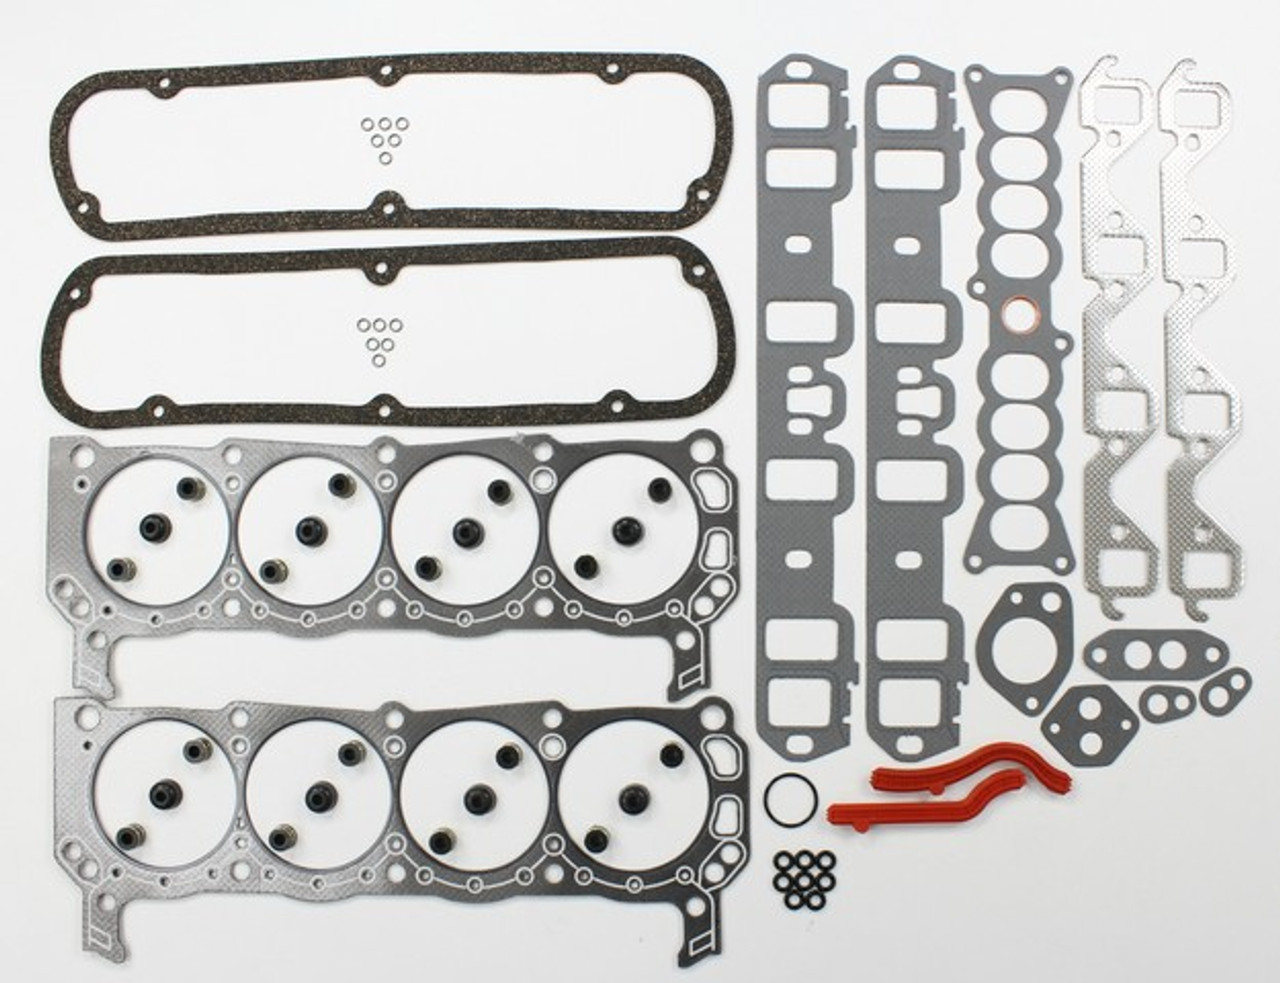 1990 Ford Mustang 5.0L Head Gasket Set HGS4104.E14